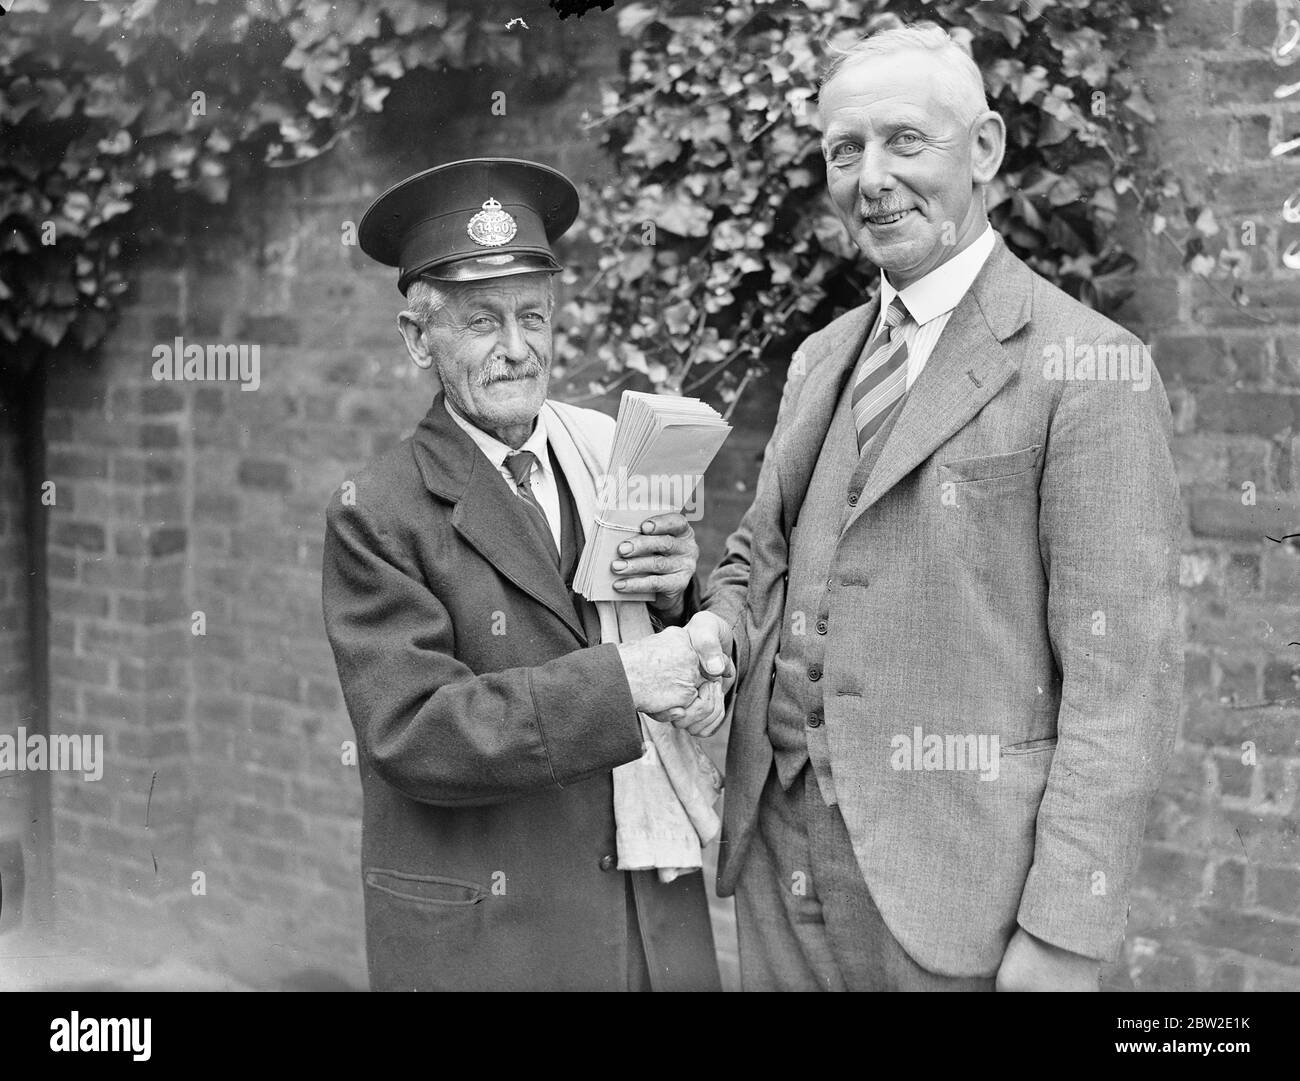 Mr John Brooks being congratulated by overseer EW Enmuns (right) he is reputed to be the oldest post man in London aged 72, of Southgate. He has now retired. 23 July 1937. Stock Photo